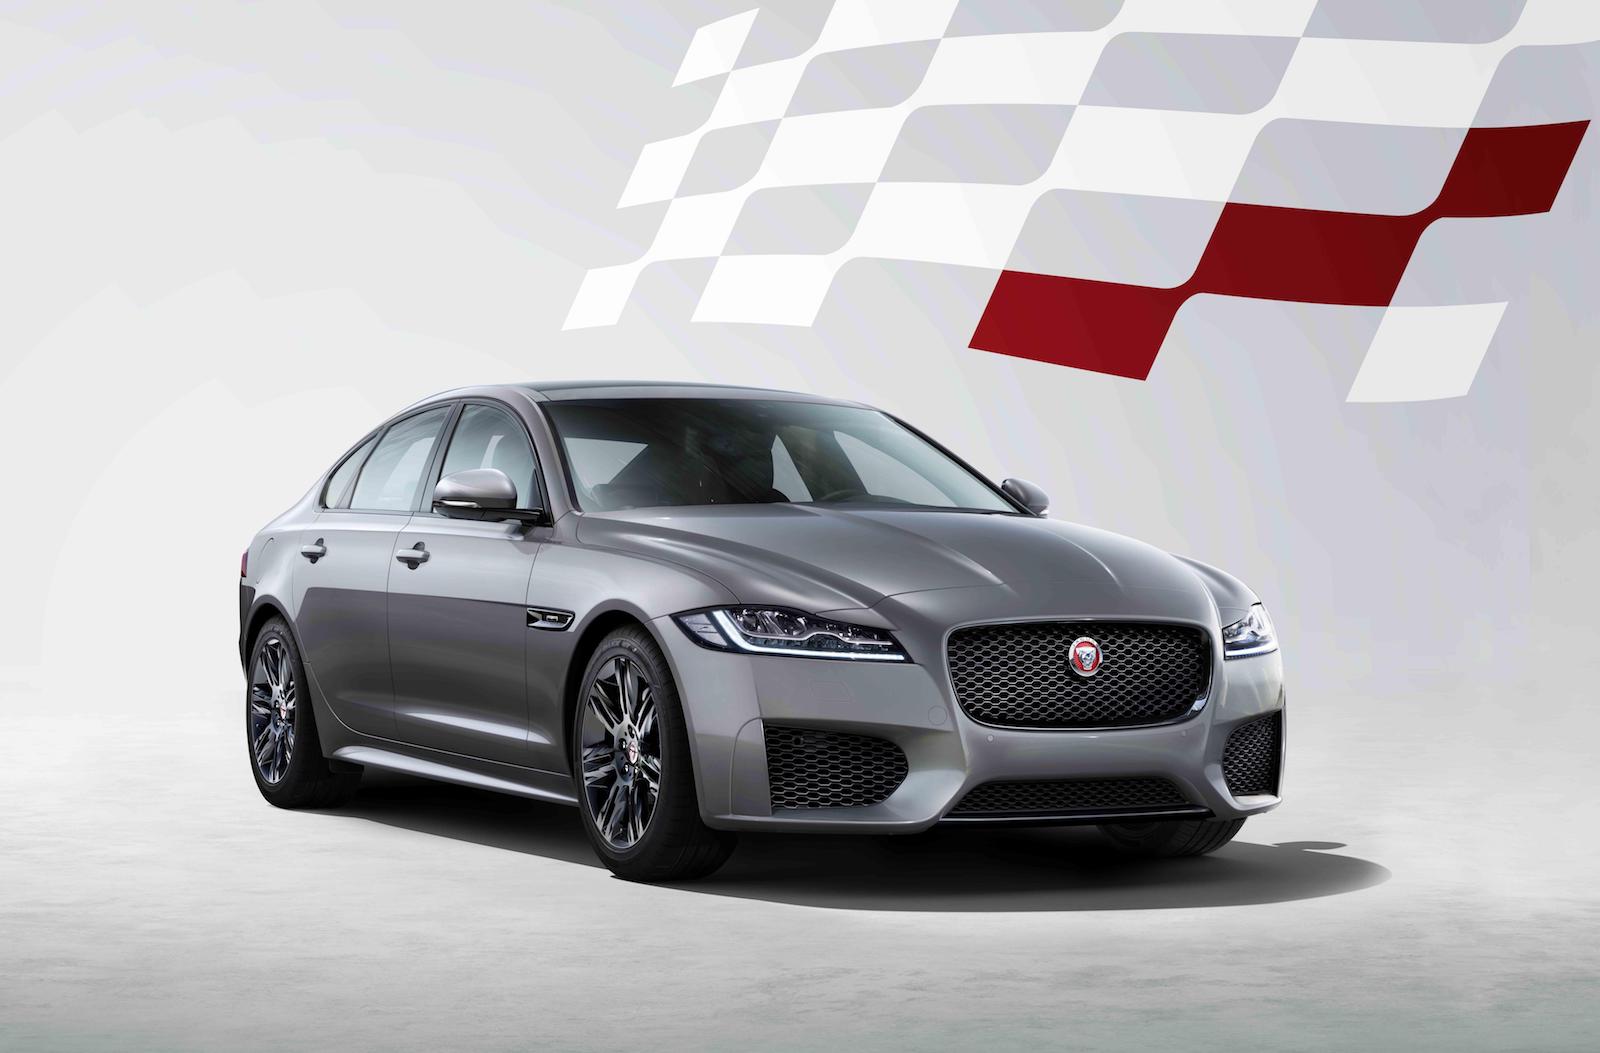 MY2020 Jaguar XF announced with Chequered Flag edition